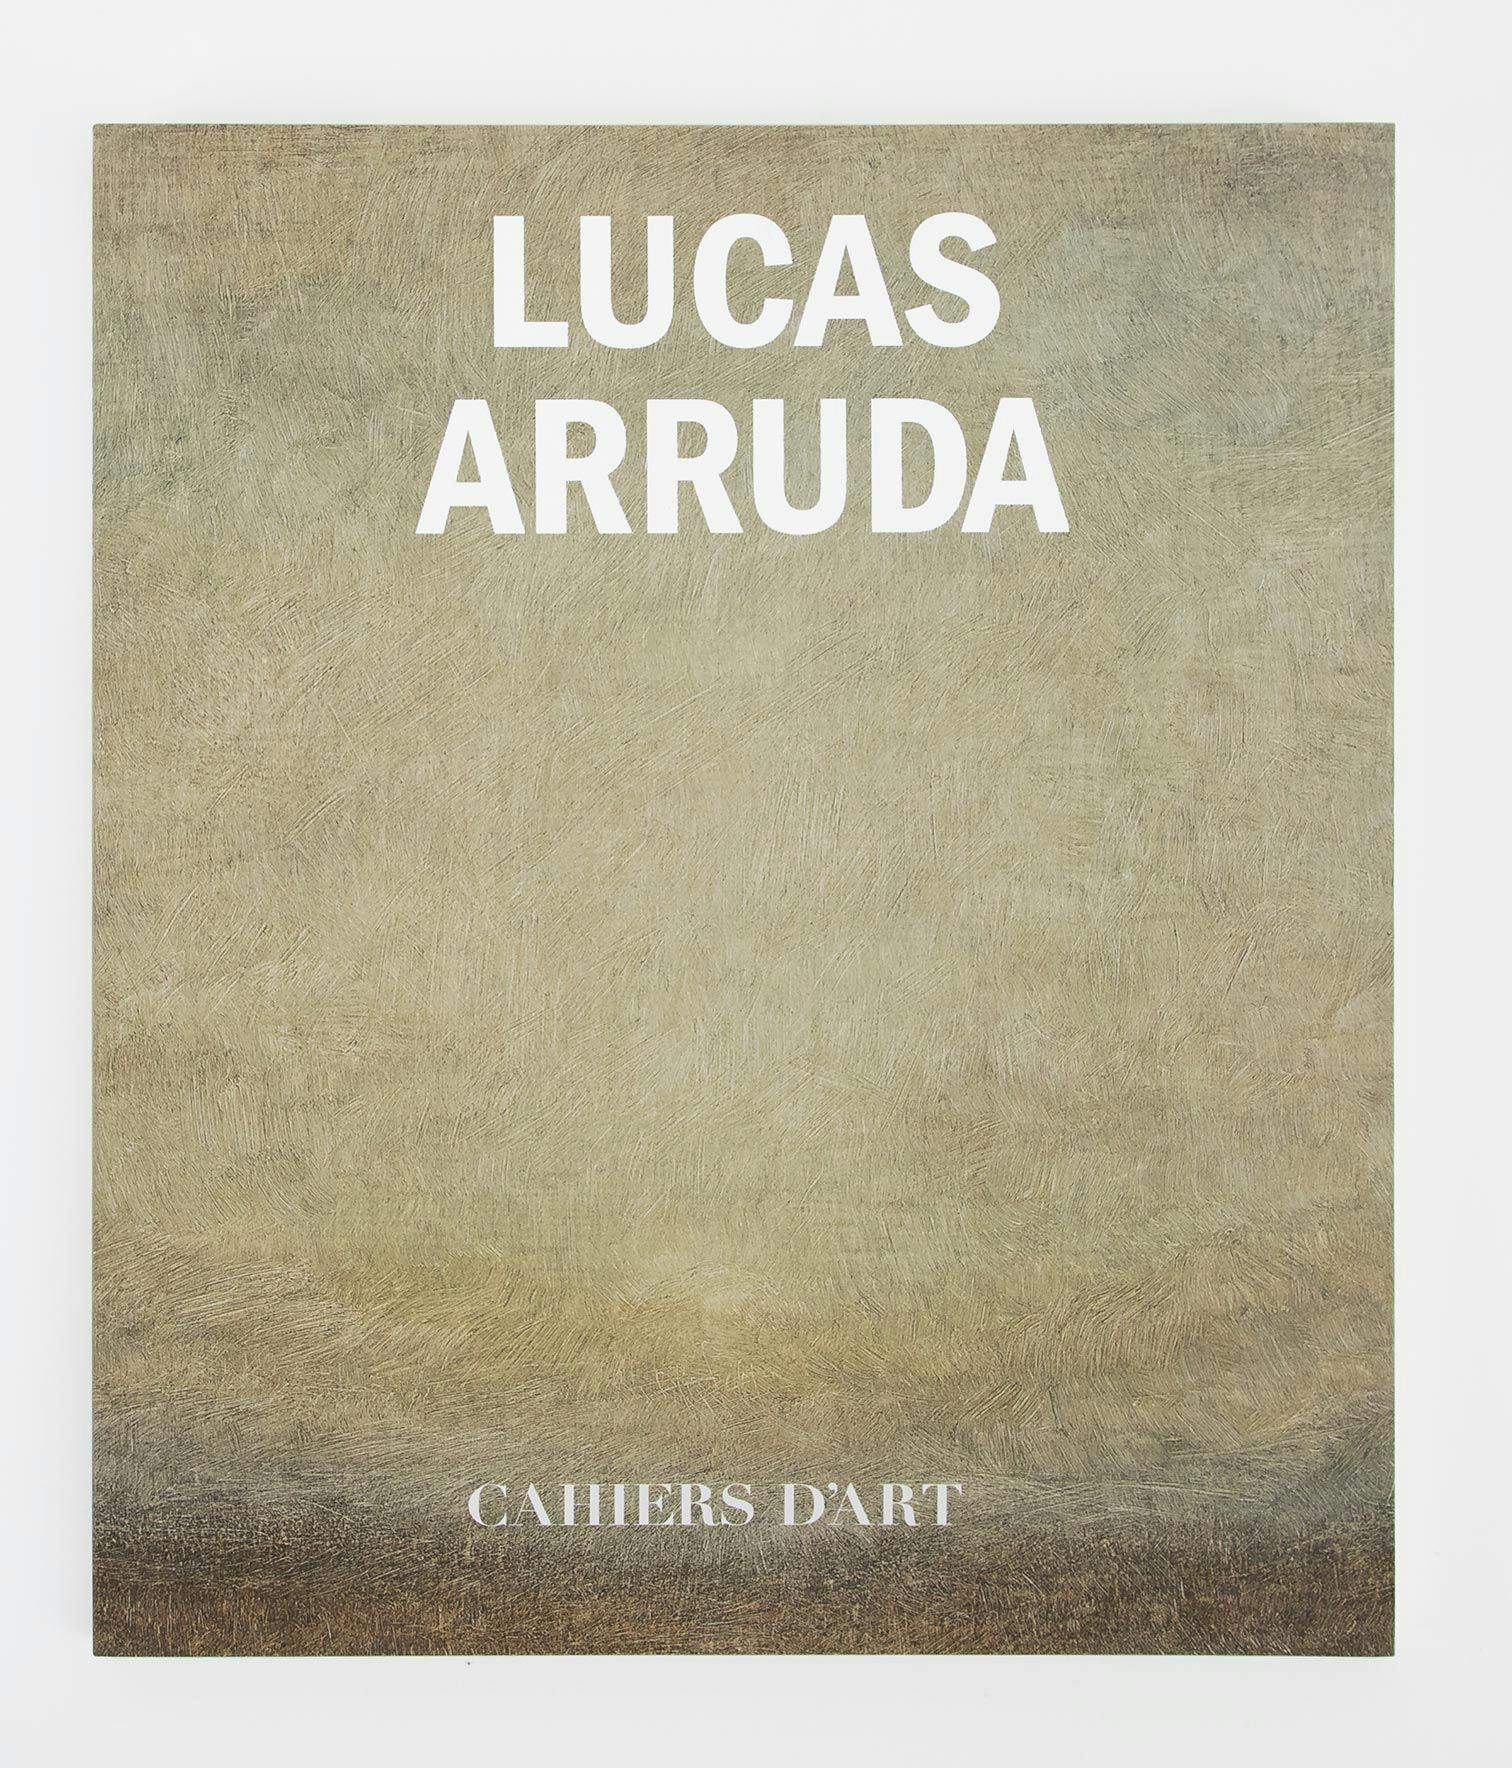 The cover of a book, titled Lucas Arruda.